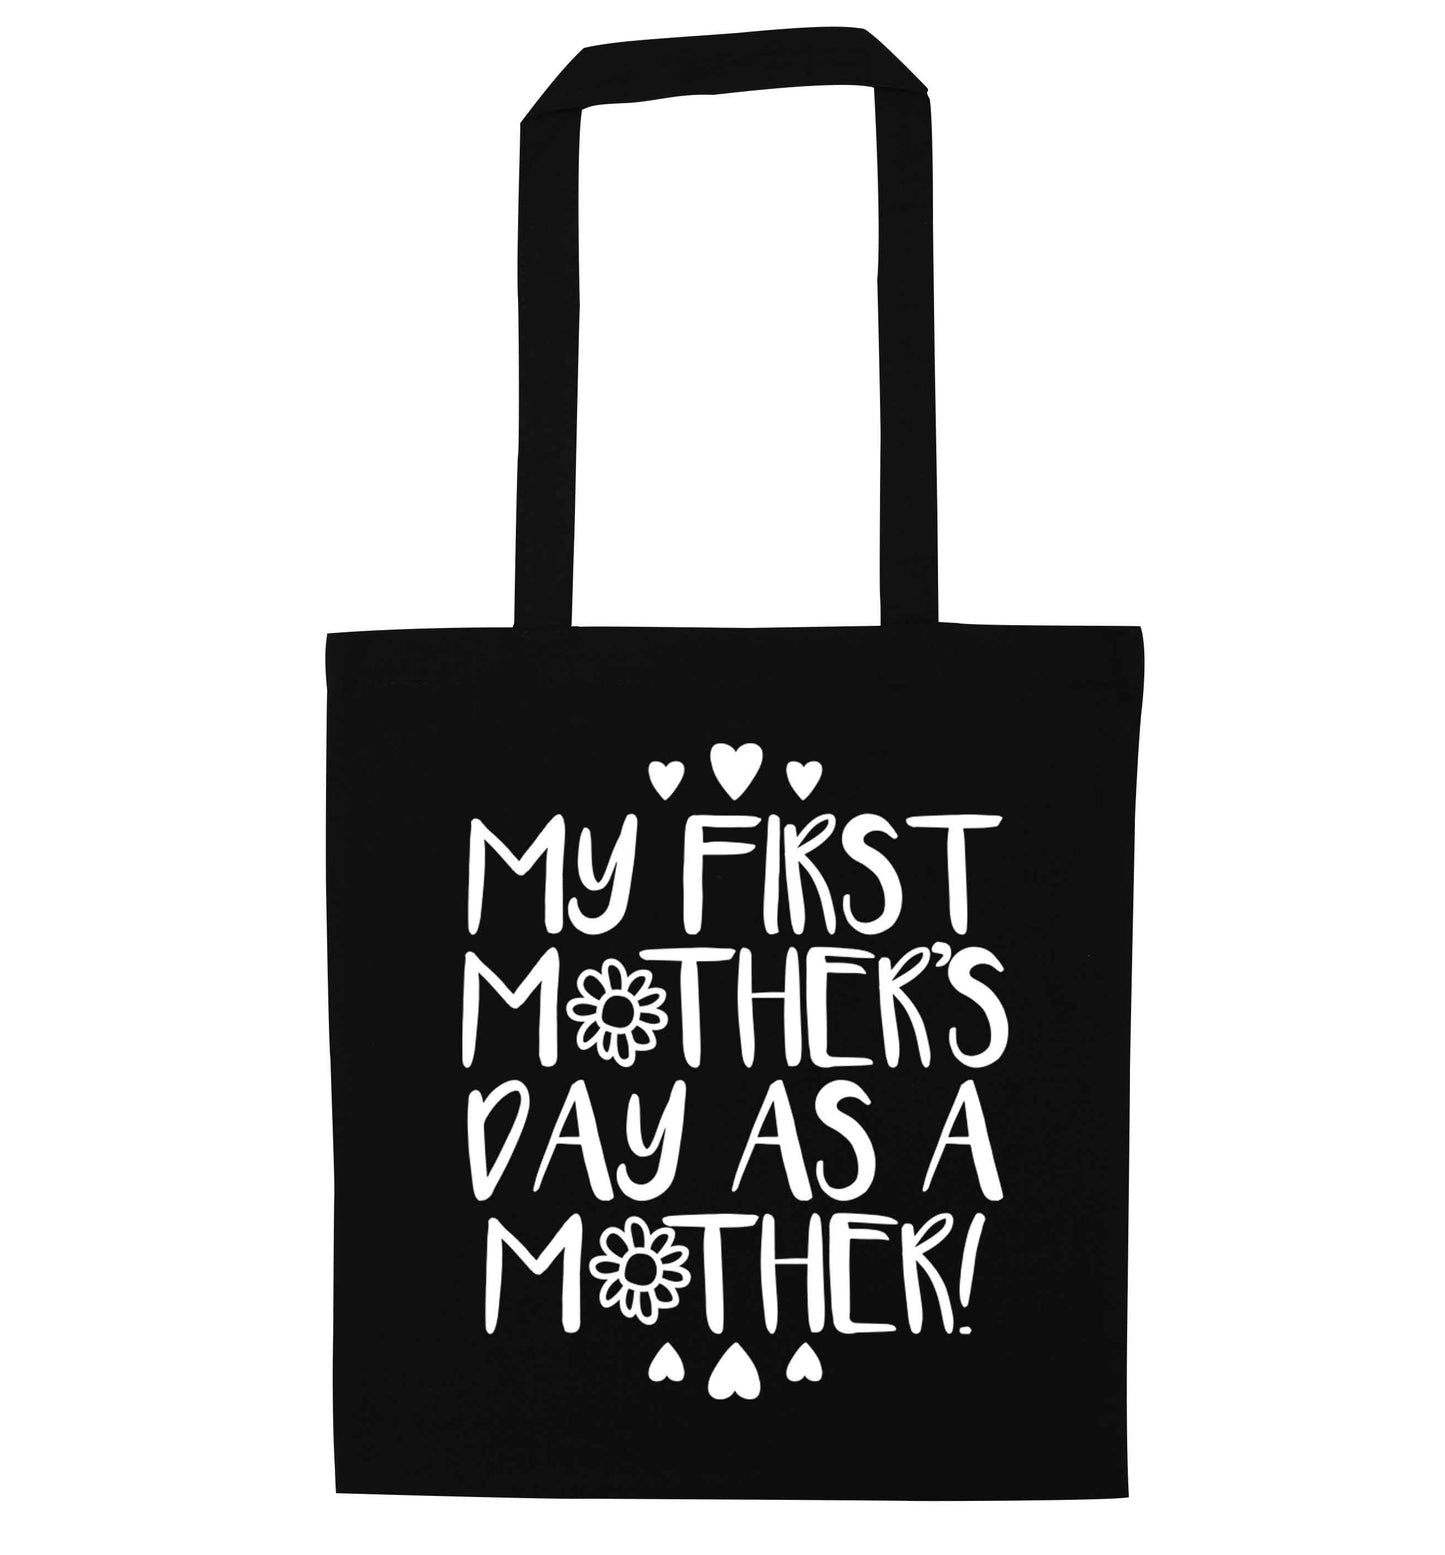 It's my first mother's day as a mother black tote bag